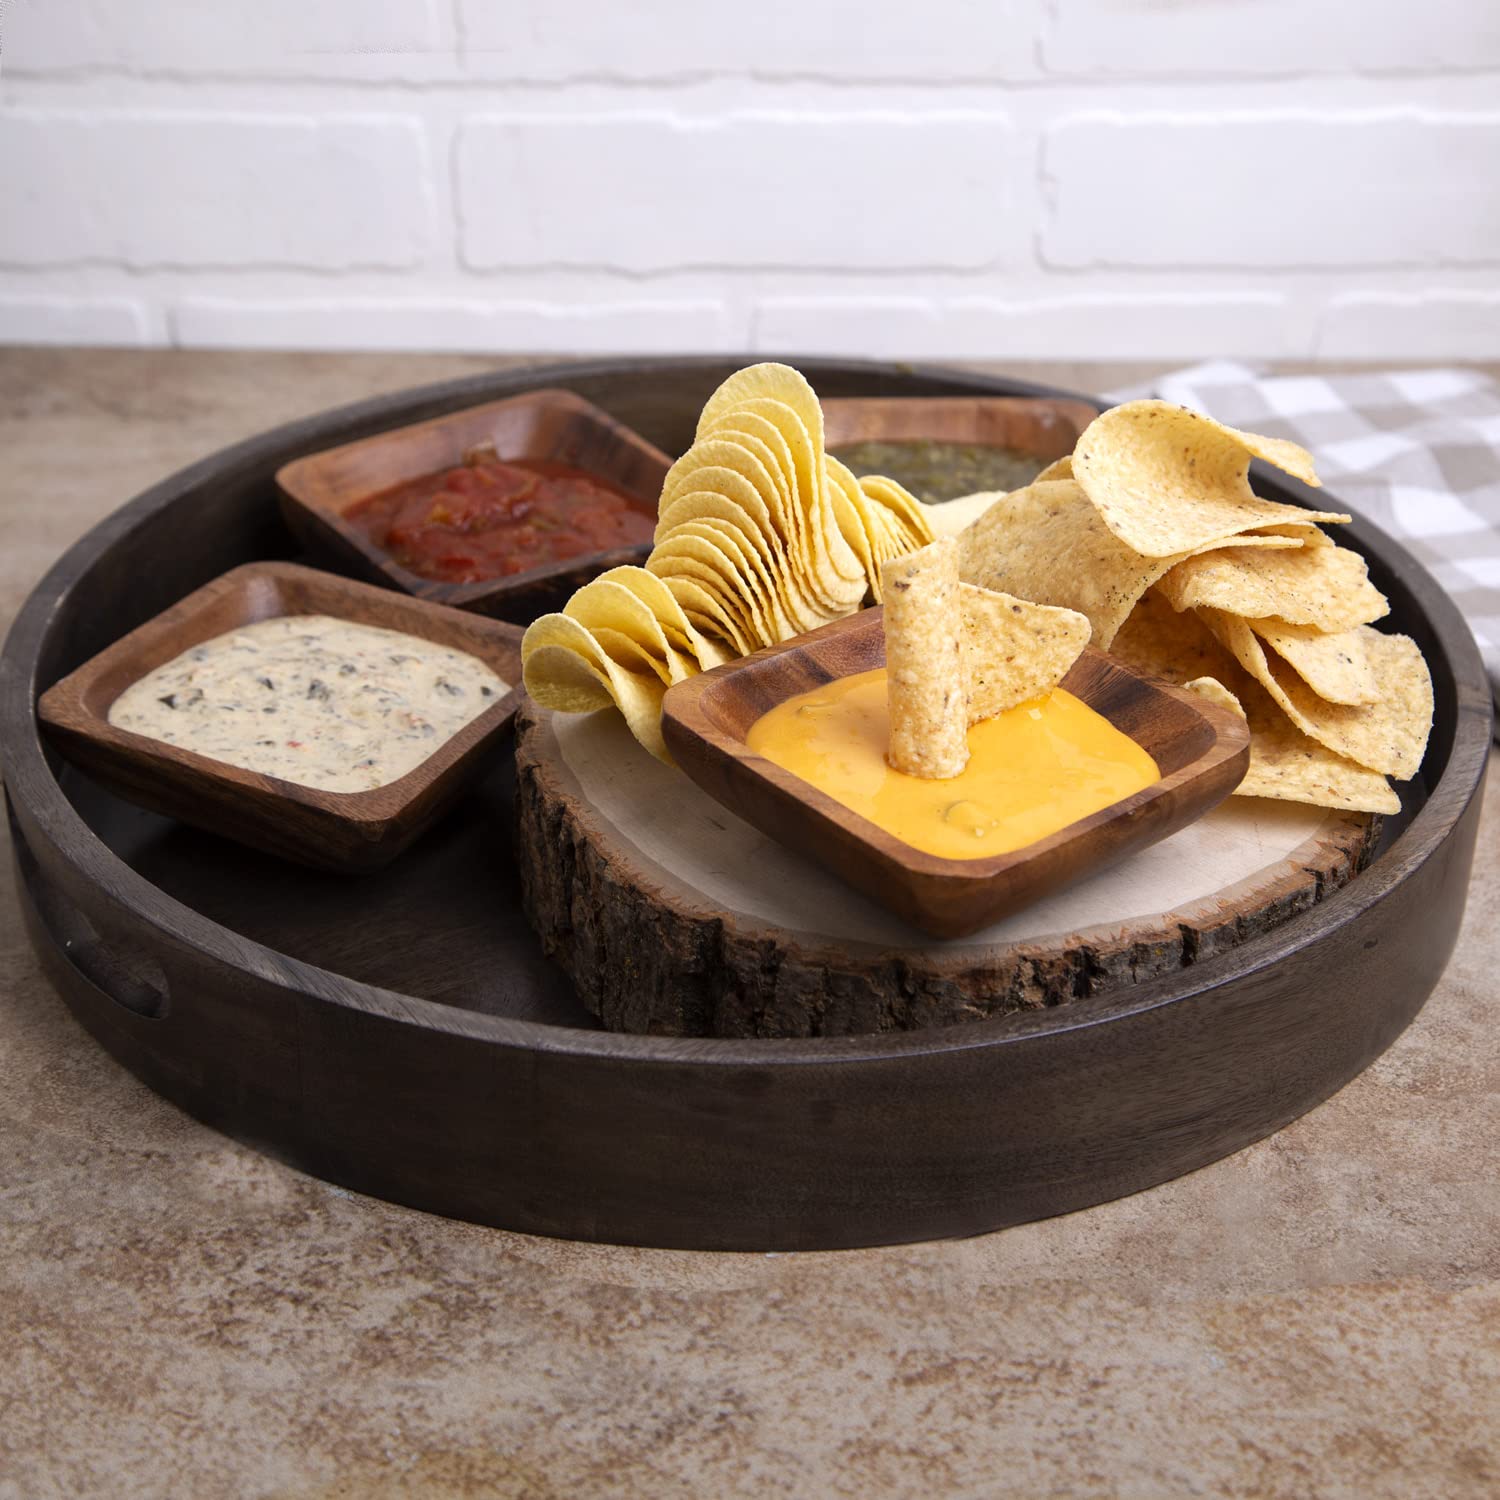 Glaver's Natural Acacia Wooden Bowls Hand-Carved Calabash Dip Tray Bowl S/4 Ideal for Appetizers, Dips, Sauce, Nuts, Candy, Olives, Seeds, Desserts and More. (Square)